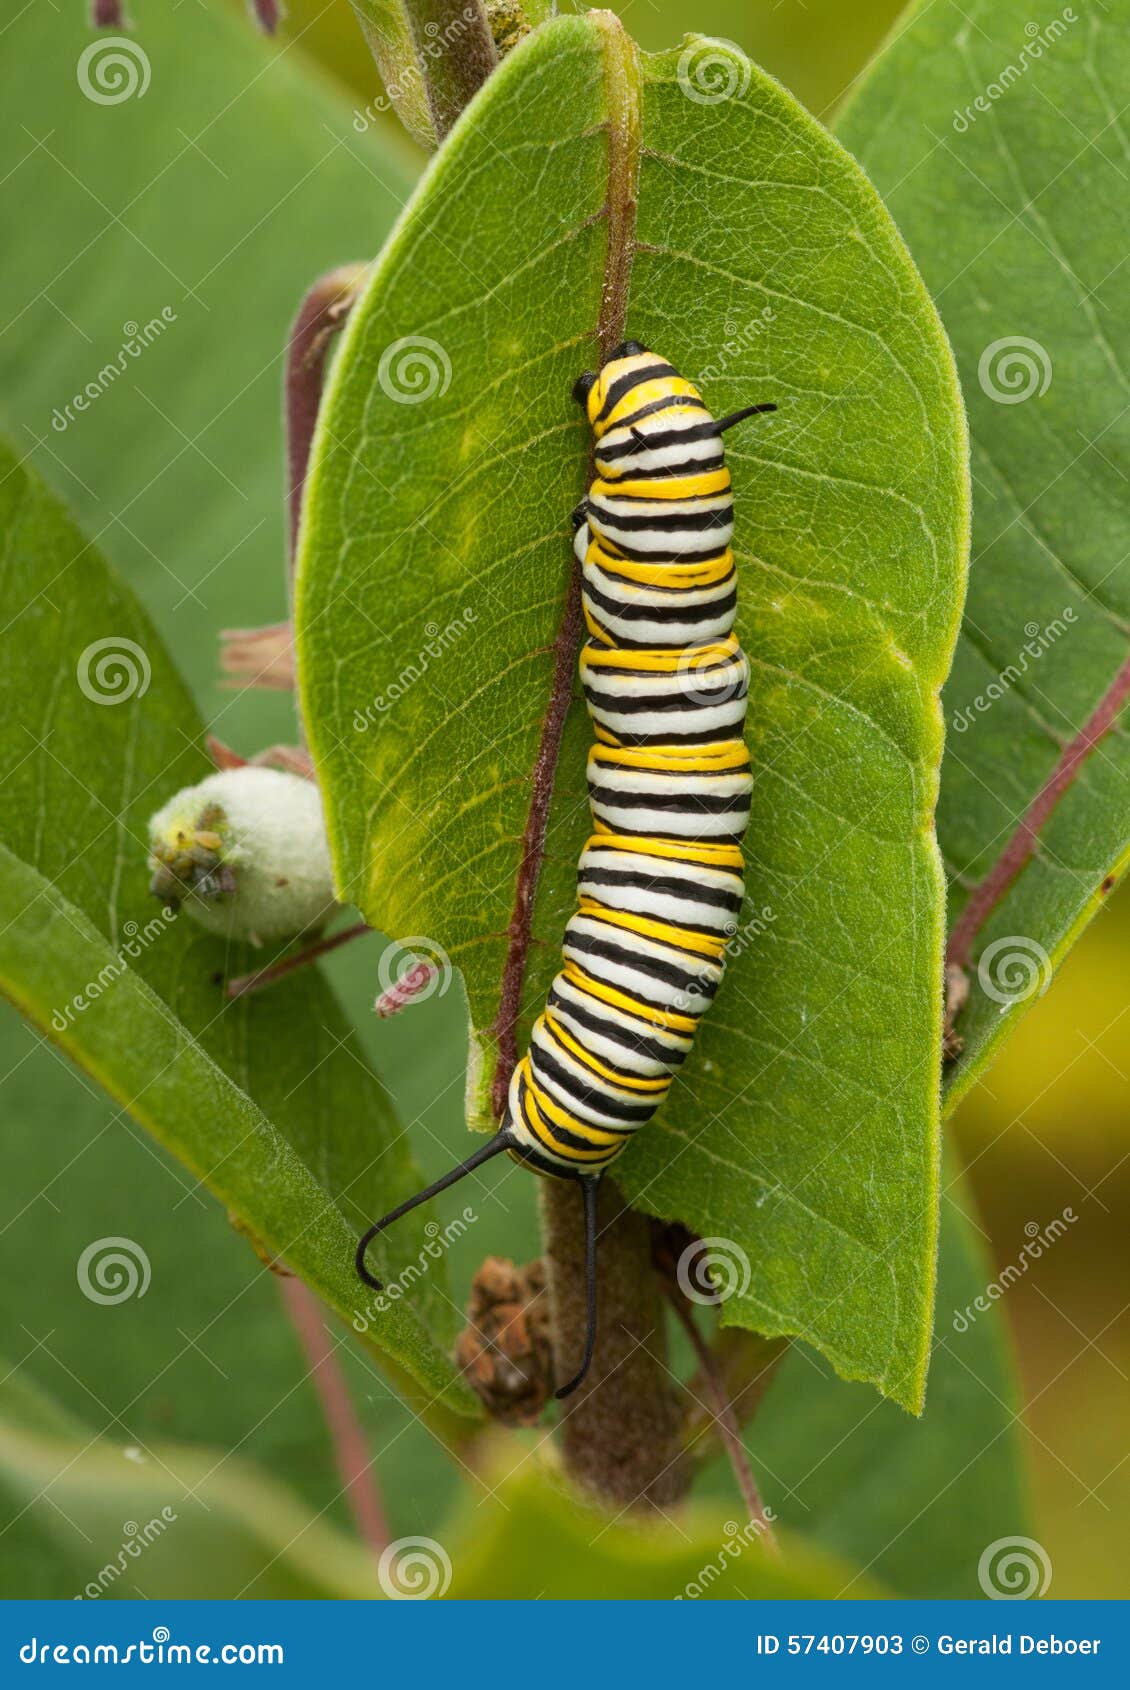 Monarch Caterpillar stock image. Image of insect, entomology - 57407903